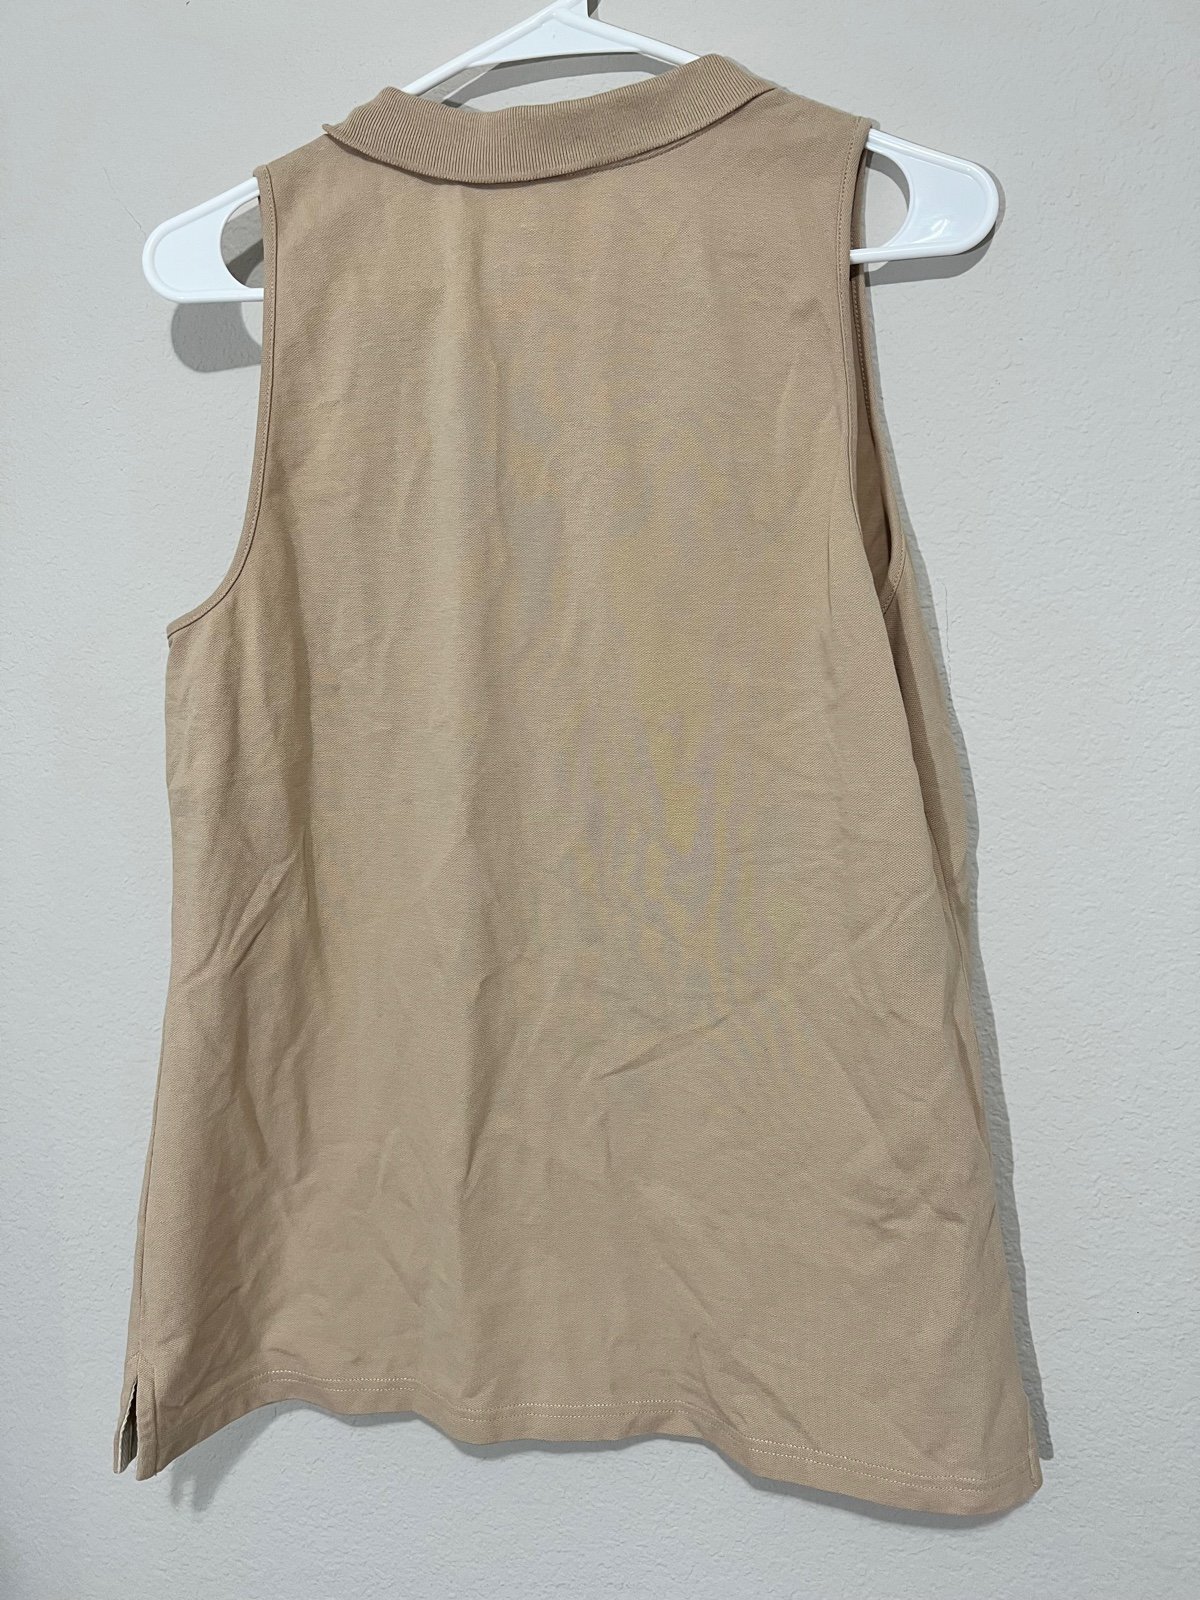 Special offer  Talbots Tank Top Button V Neck Top in Tan Light Brown GXt6gS7CI Great